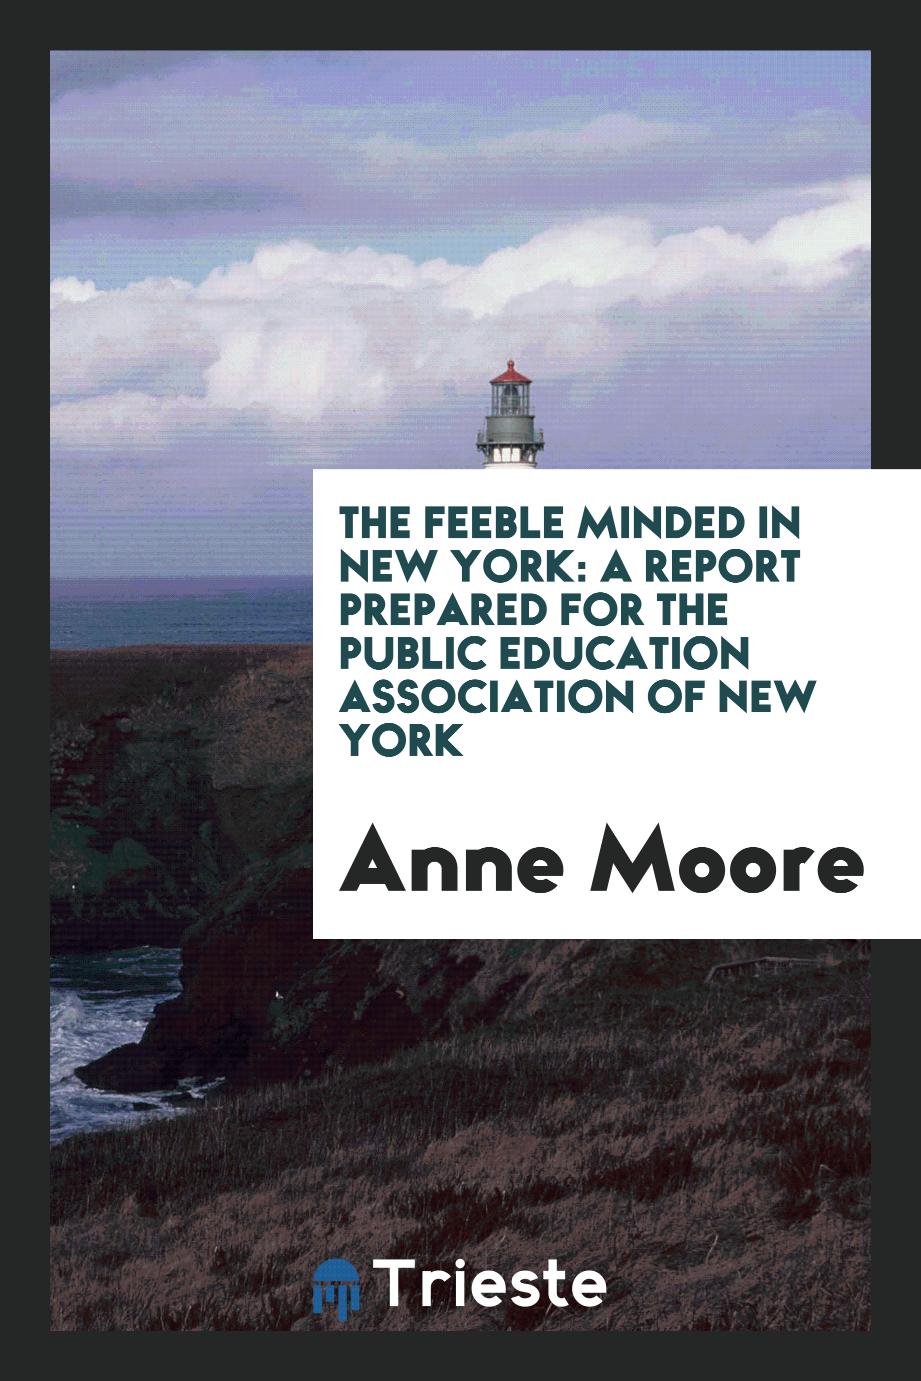 The Feeble Minded in New York: A Report Prepared for the Public Education Association of New York